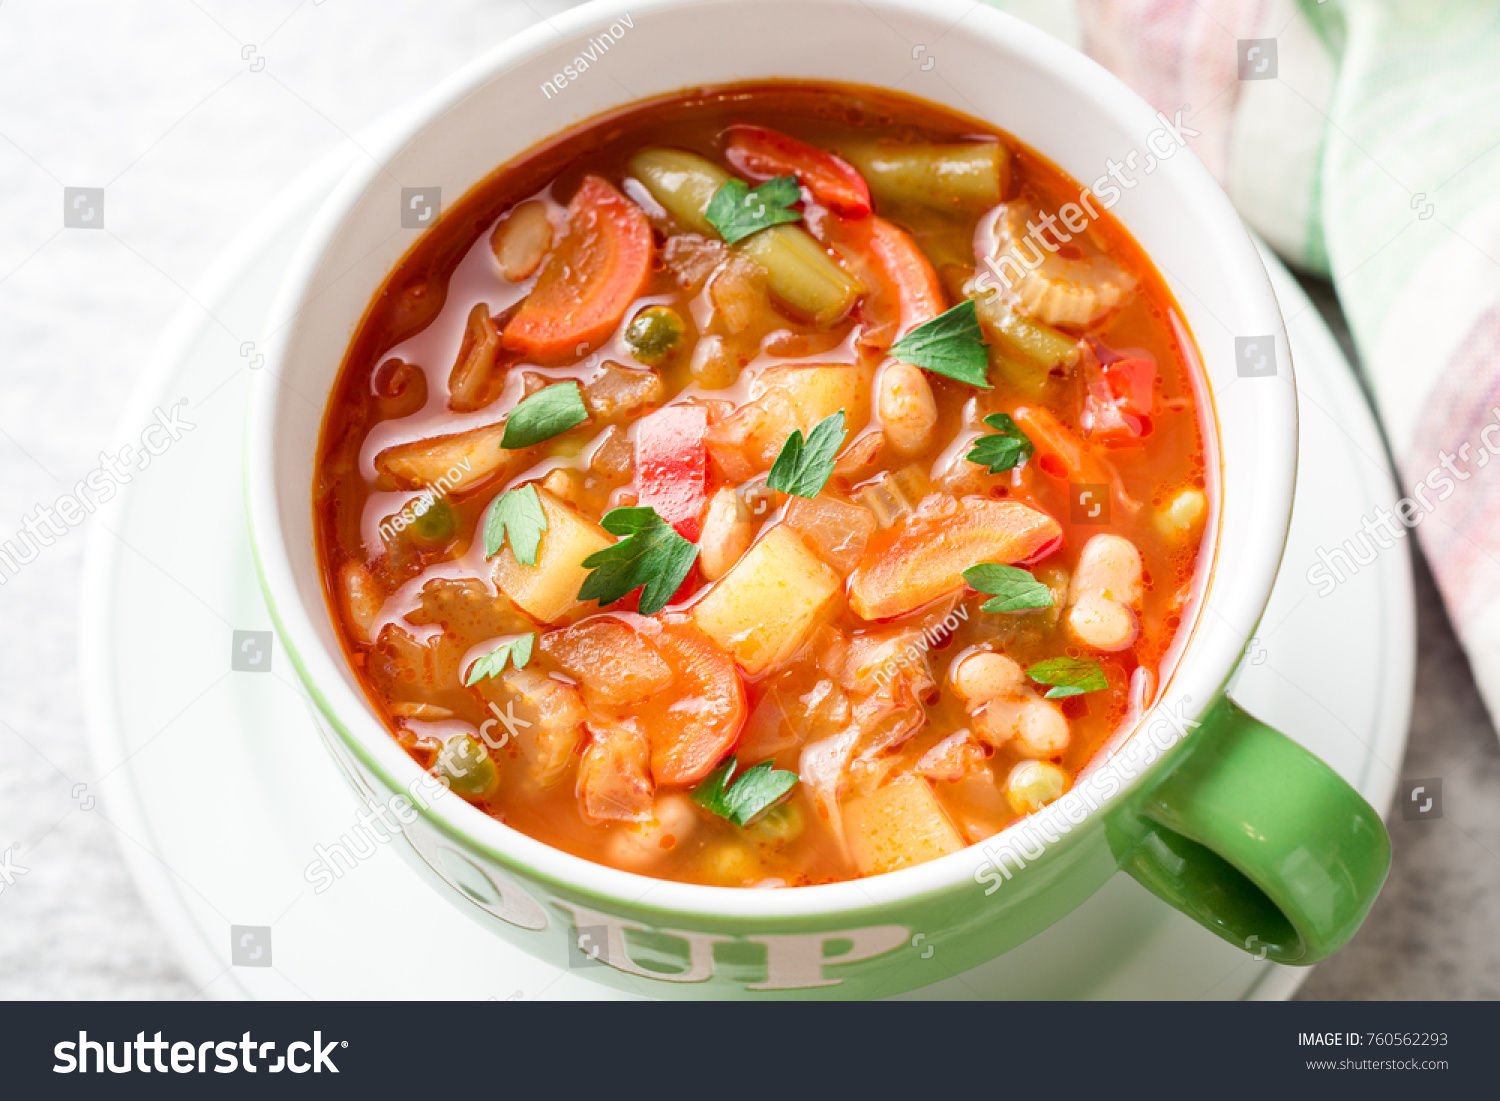 Italian minestrone soup in bowl on gray stone background. Selective focus. #760562293